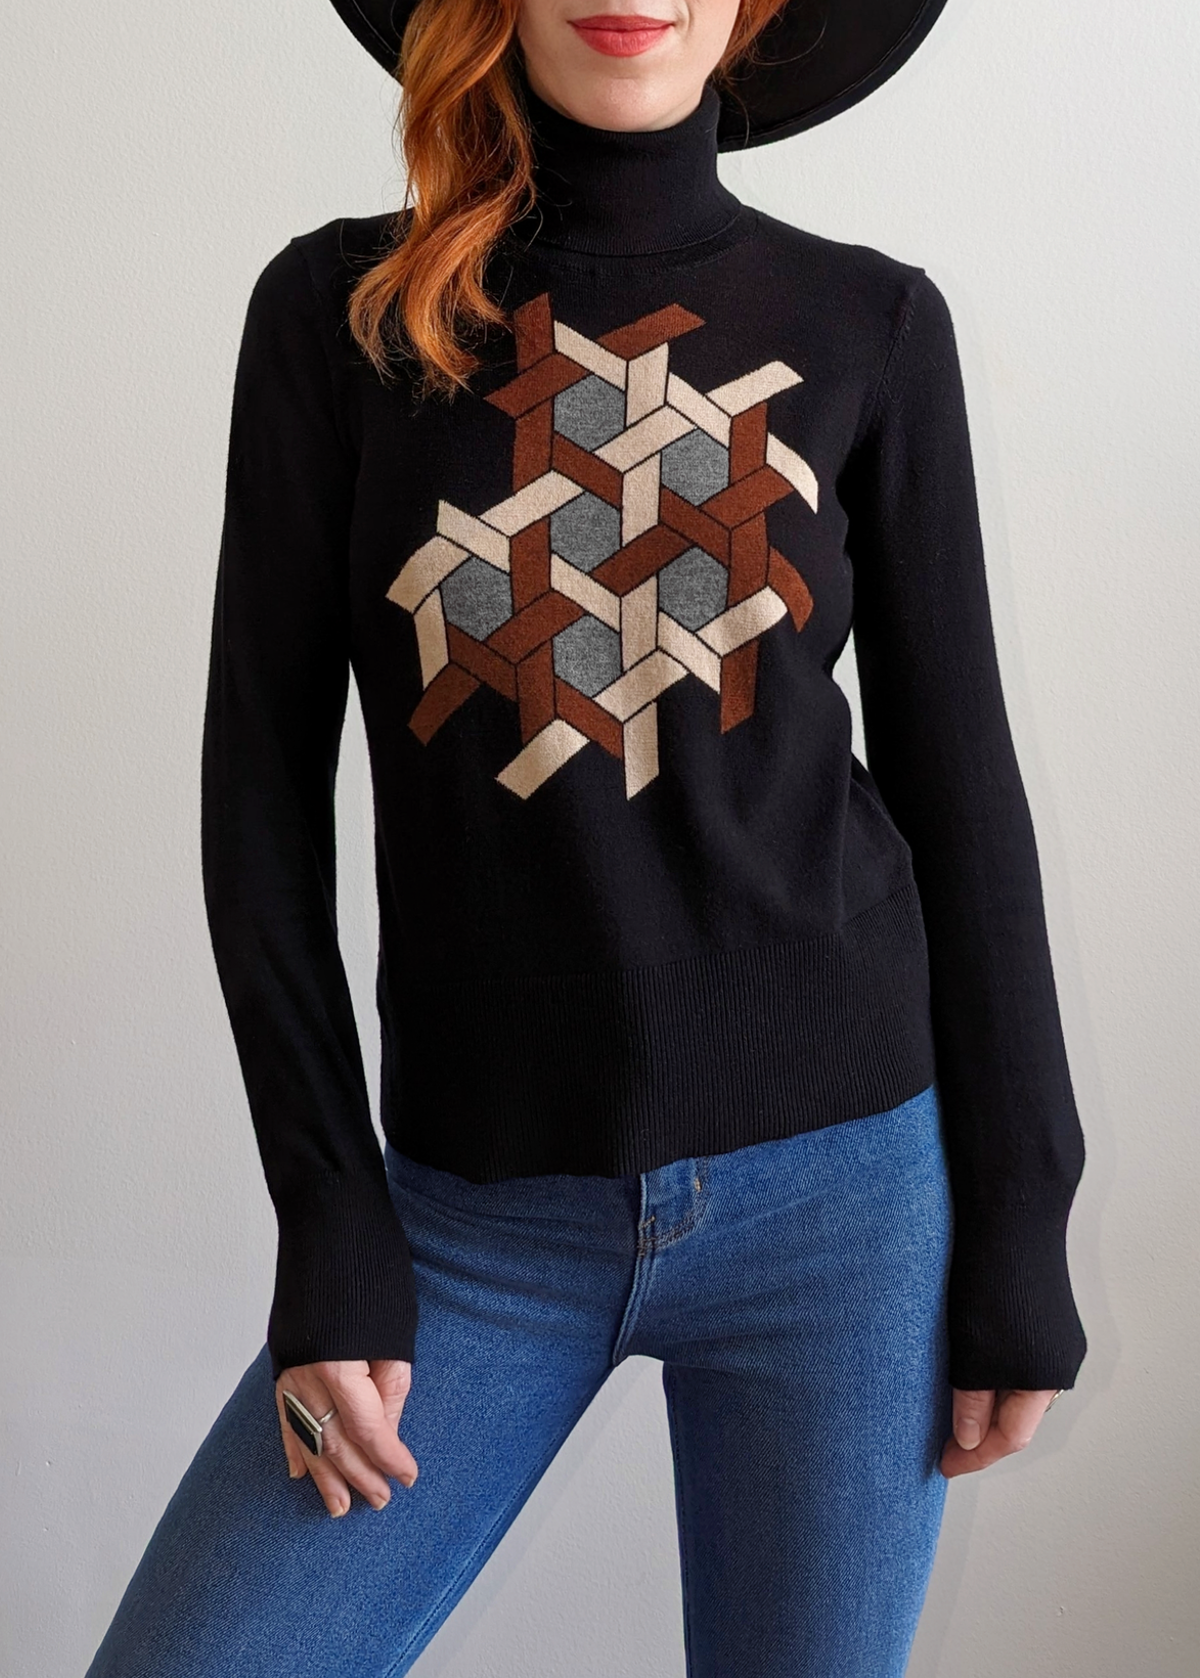 70s inspired cotton nylon wool black turtleneck knit sweater with brown, tan, and grey puzzle design at front by Nice Things by Paloma S. 